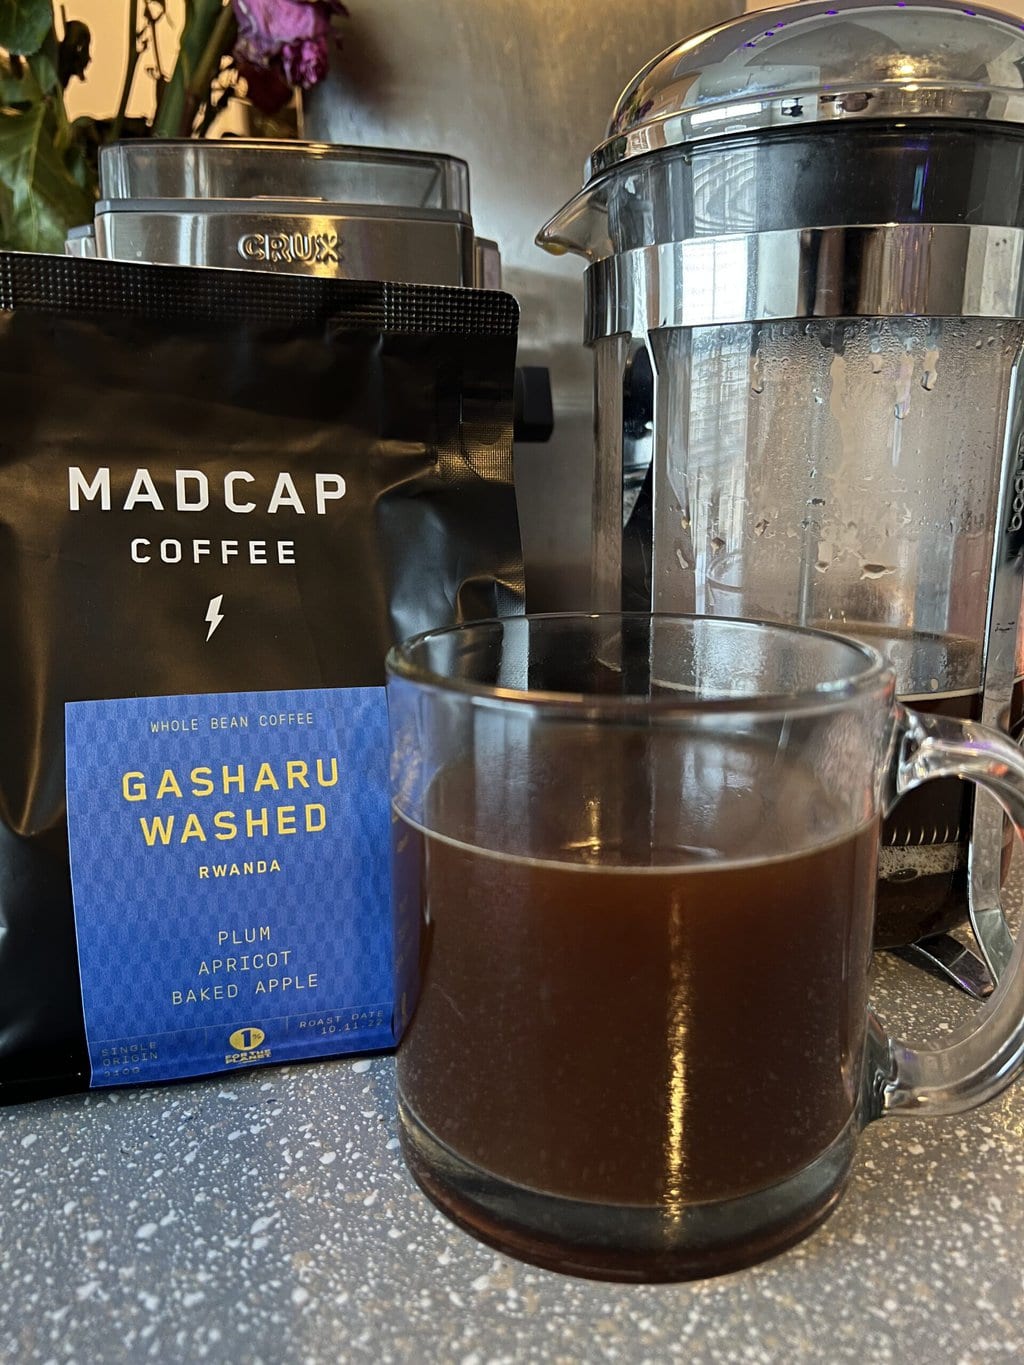 Gasharu Washed - Madcap coffee packaging with a brewed cup of coffee